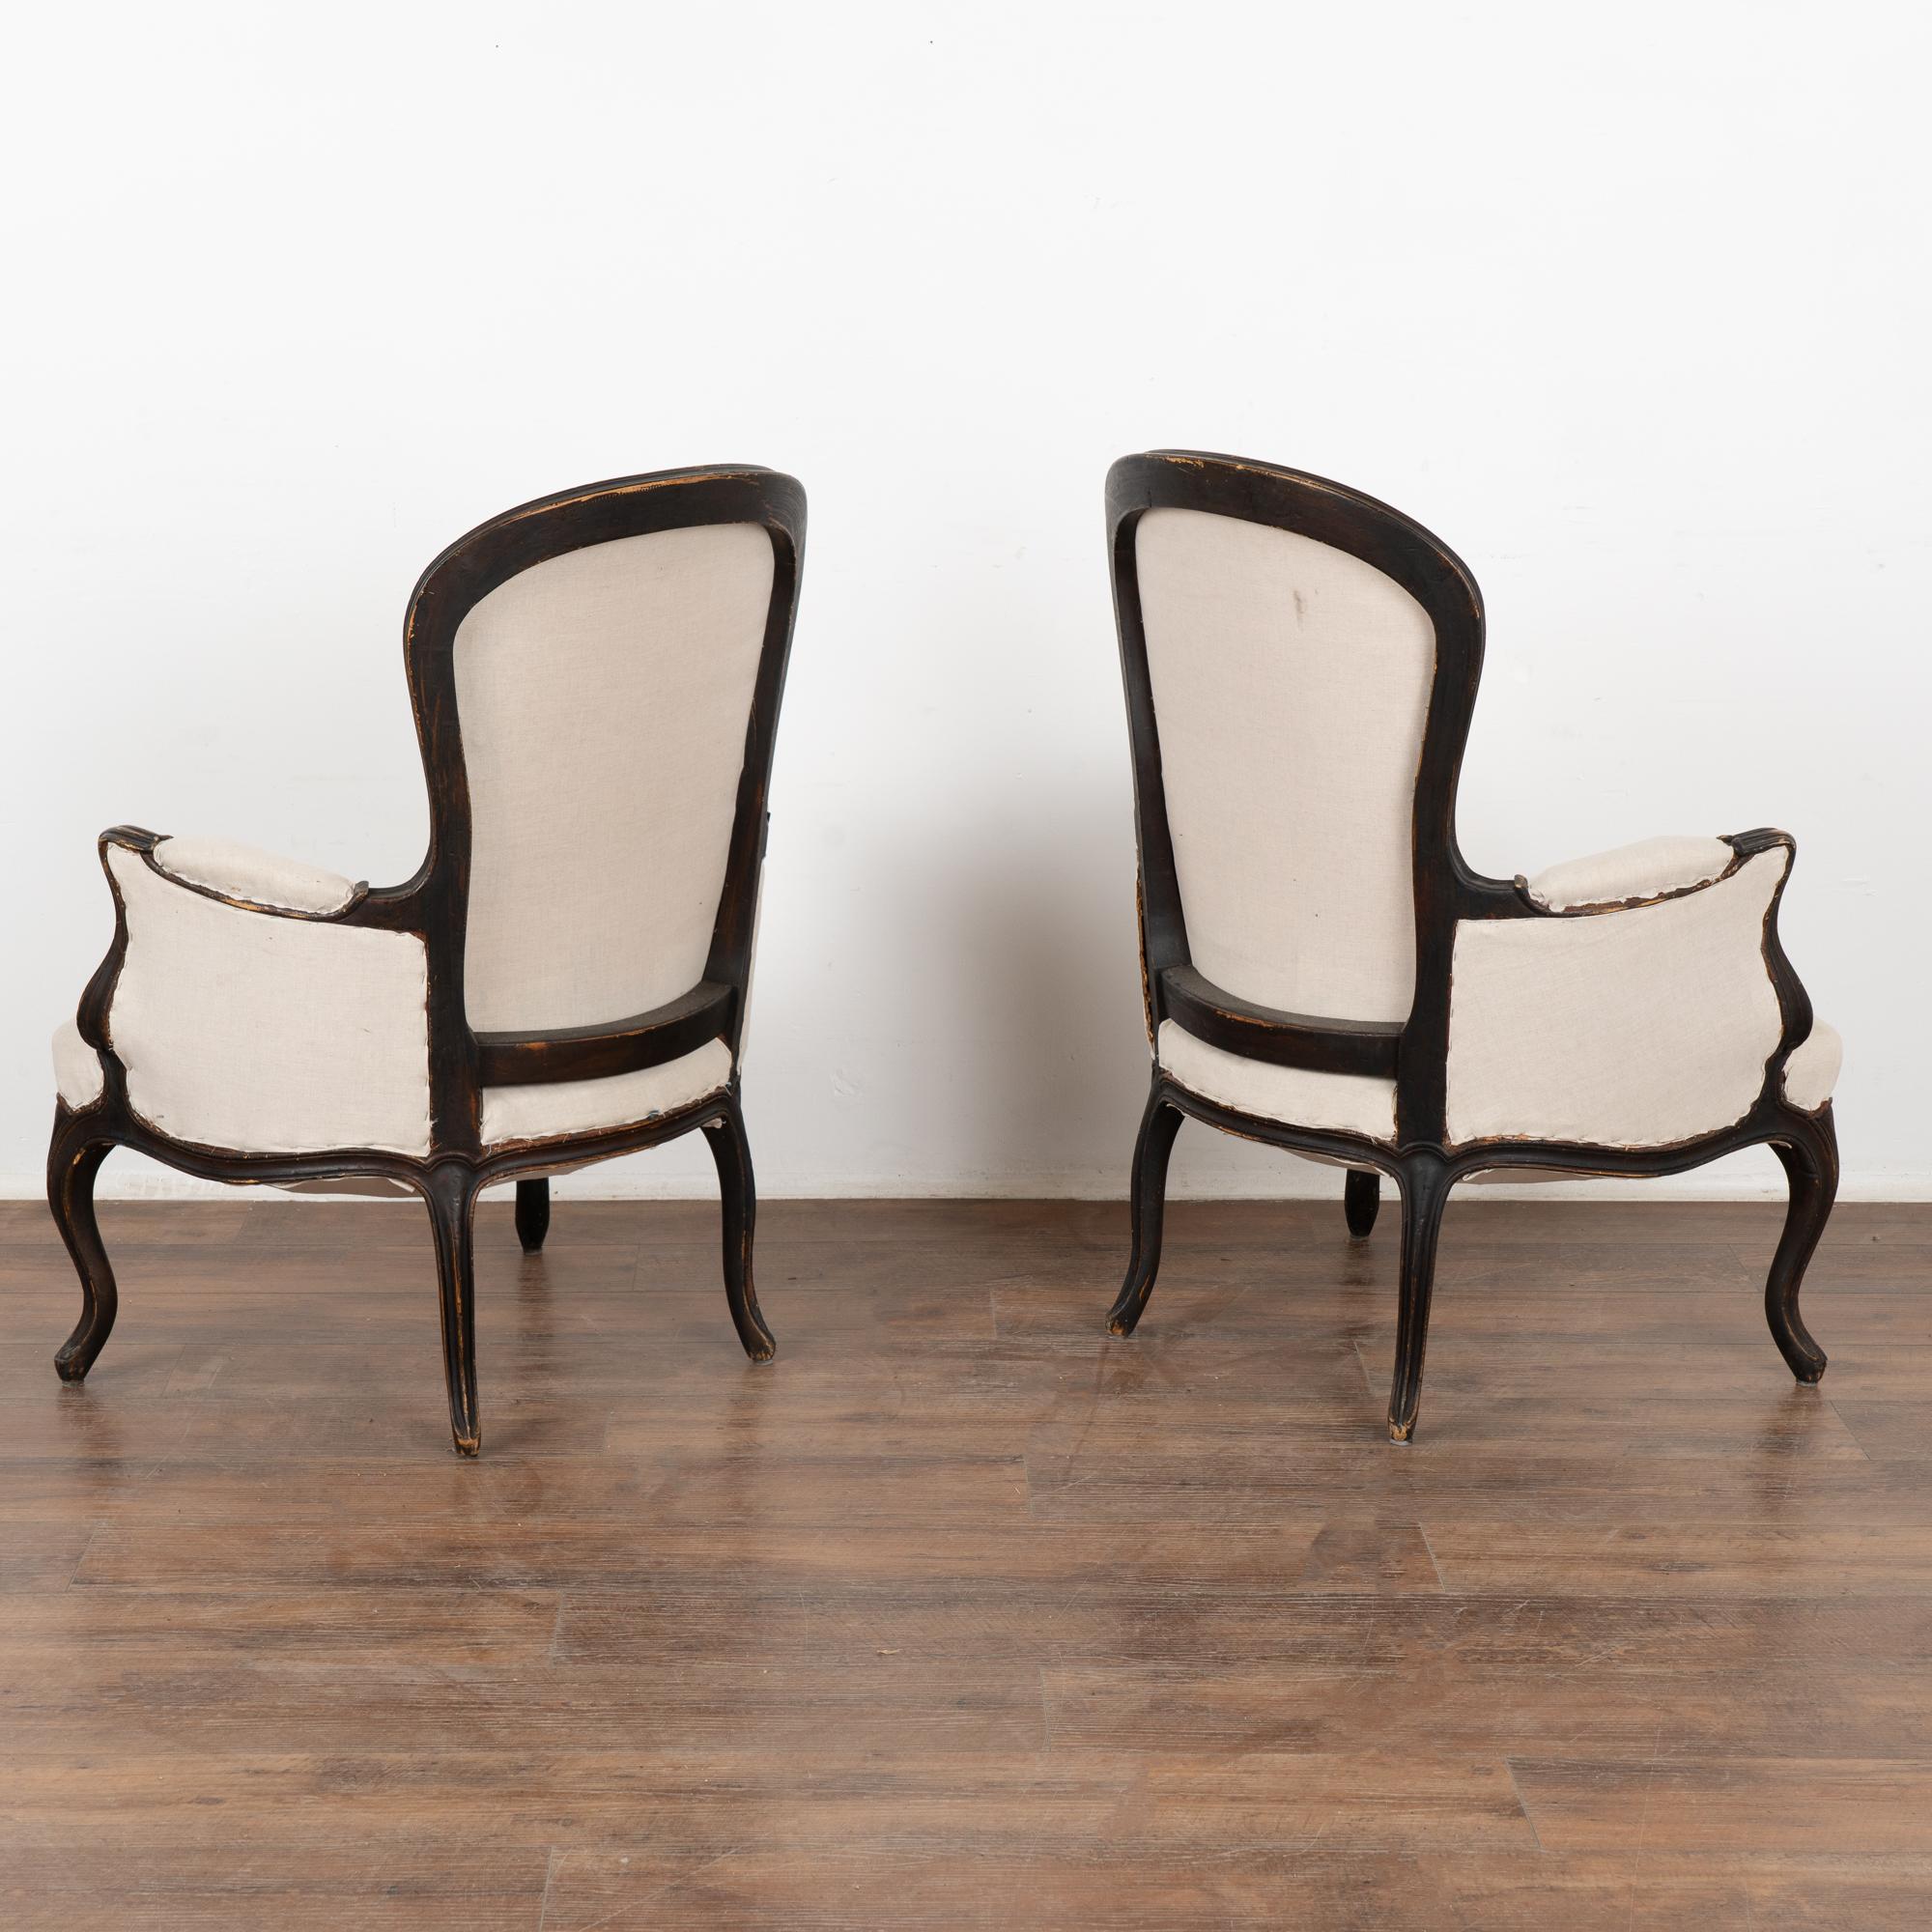 Pair, Black Painted Swedish Arm Chairs, circa 1890 For Sale 4